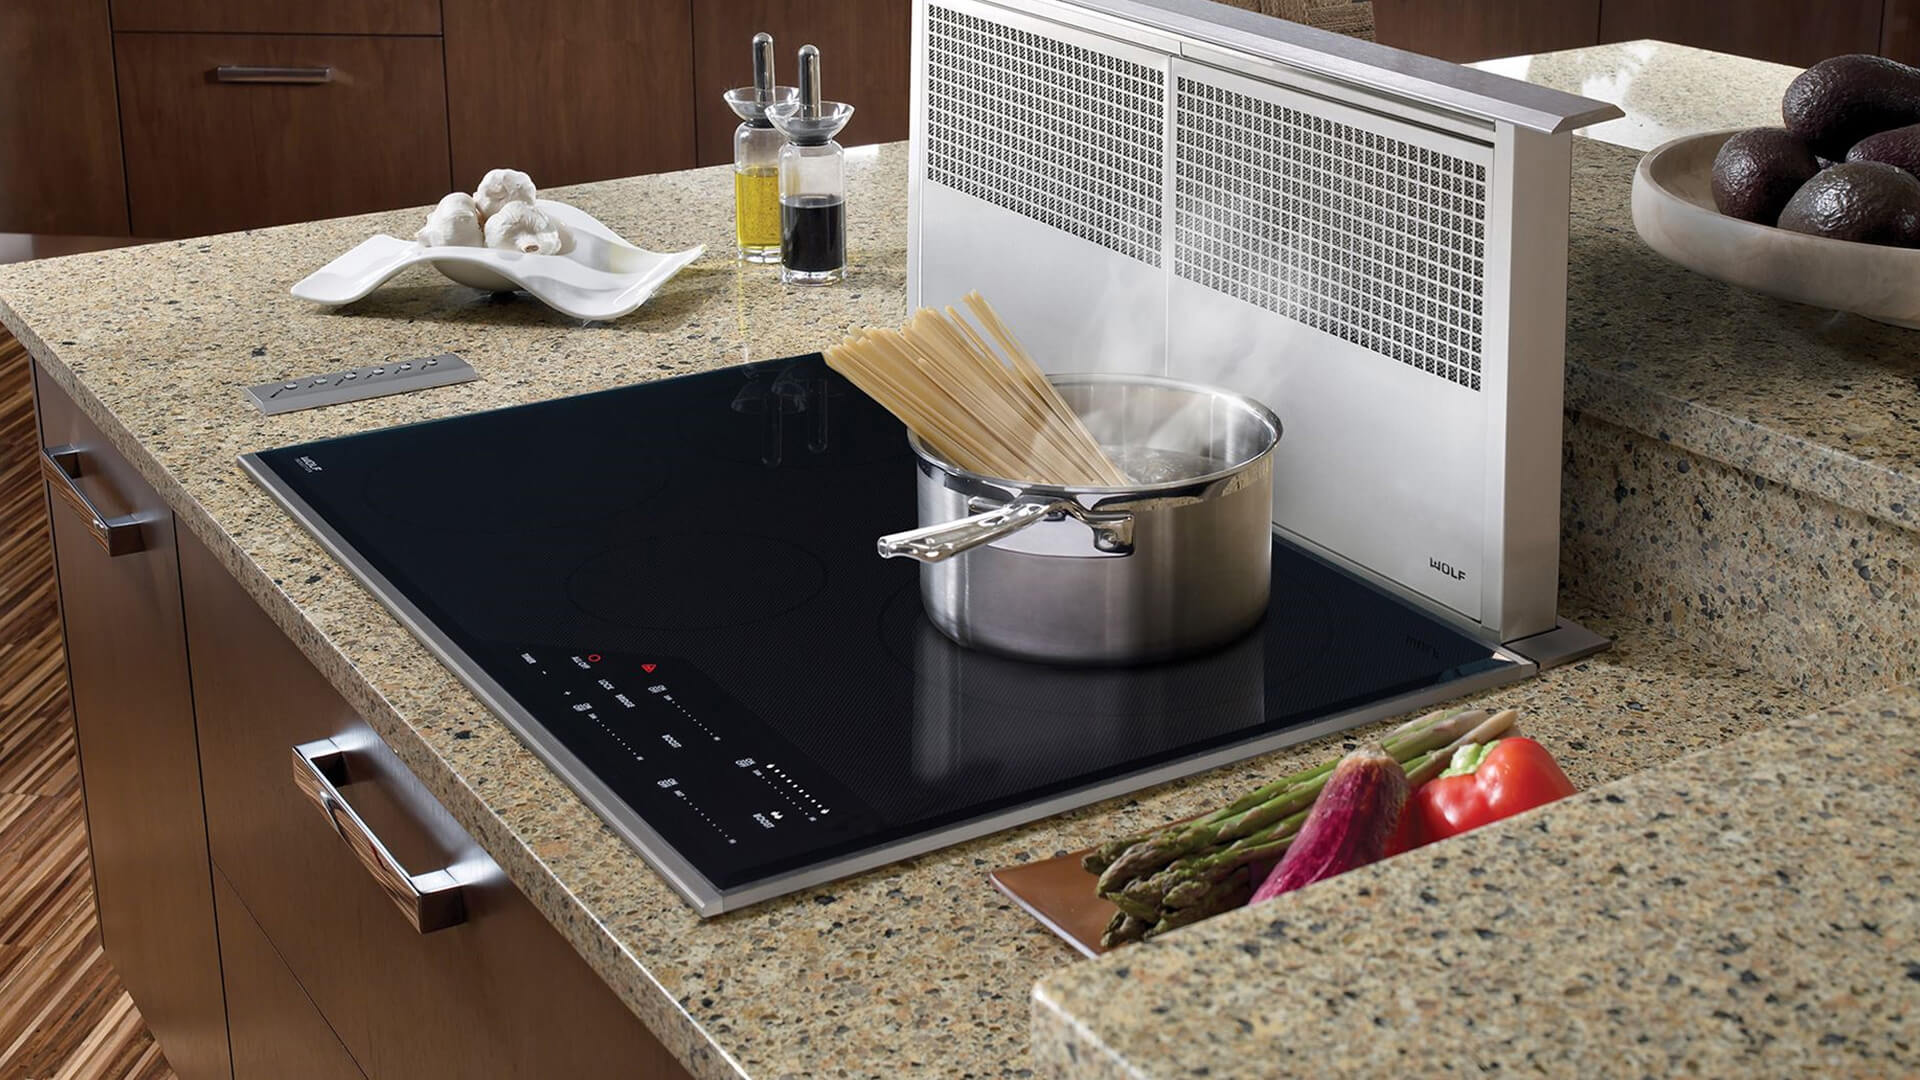 Wolf Induction Cooktop Repair | Wolf Appliance Repair Experts